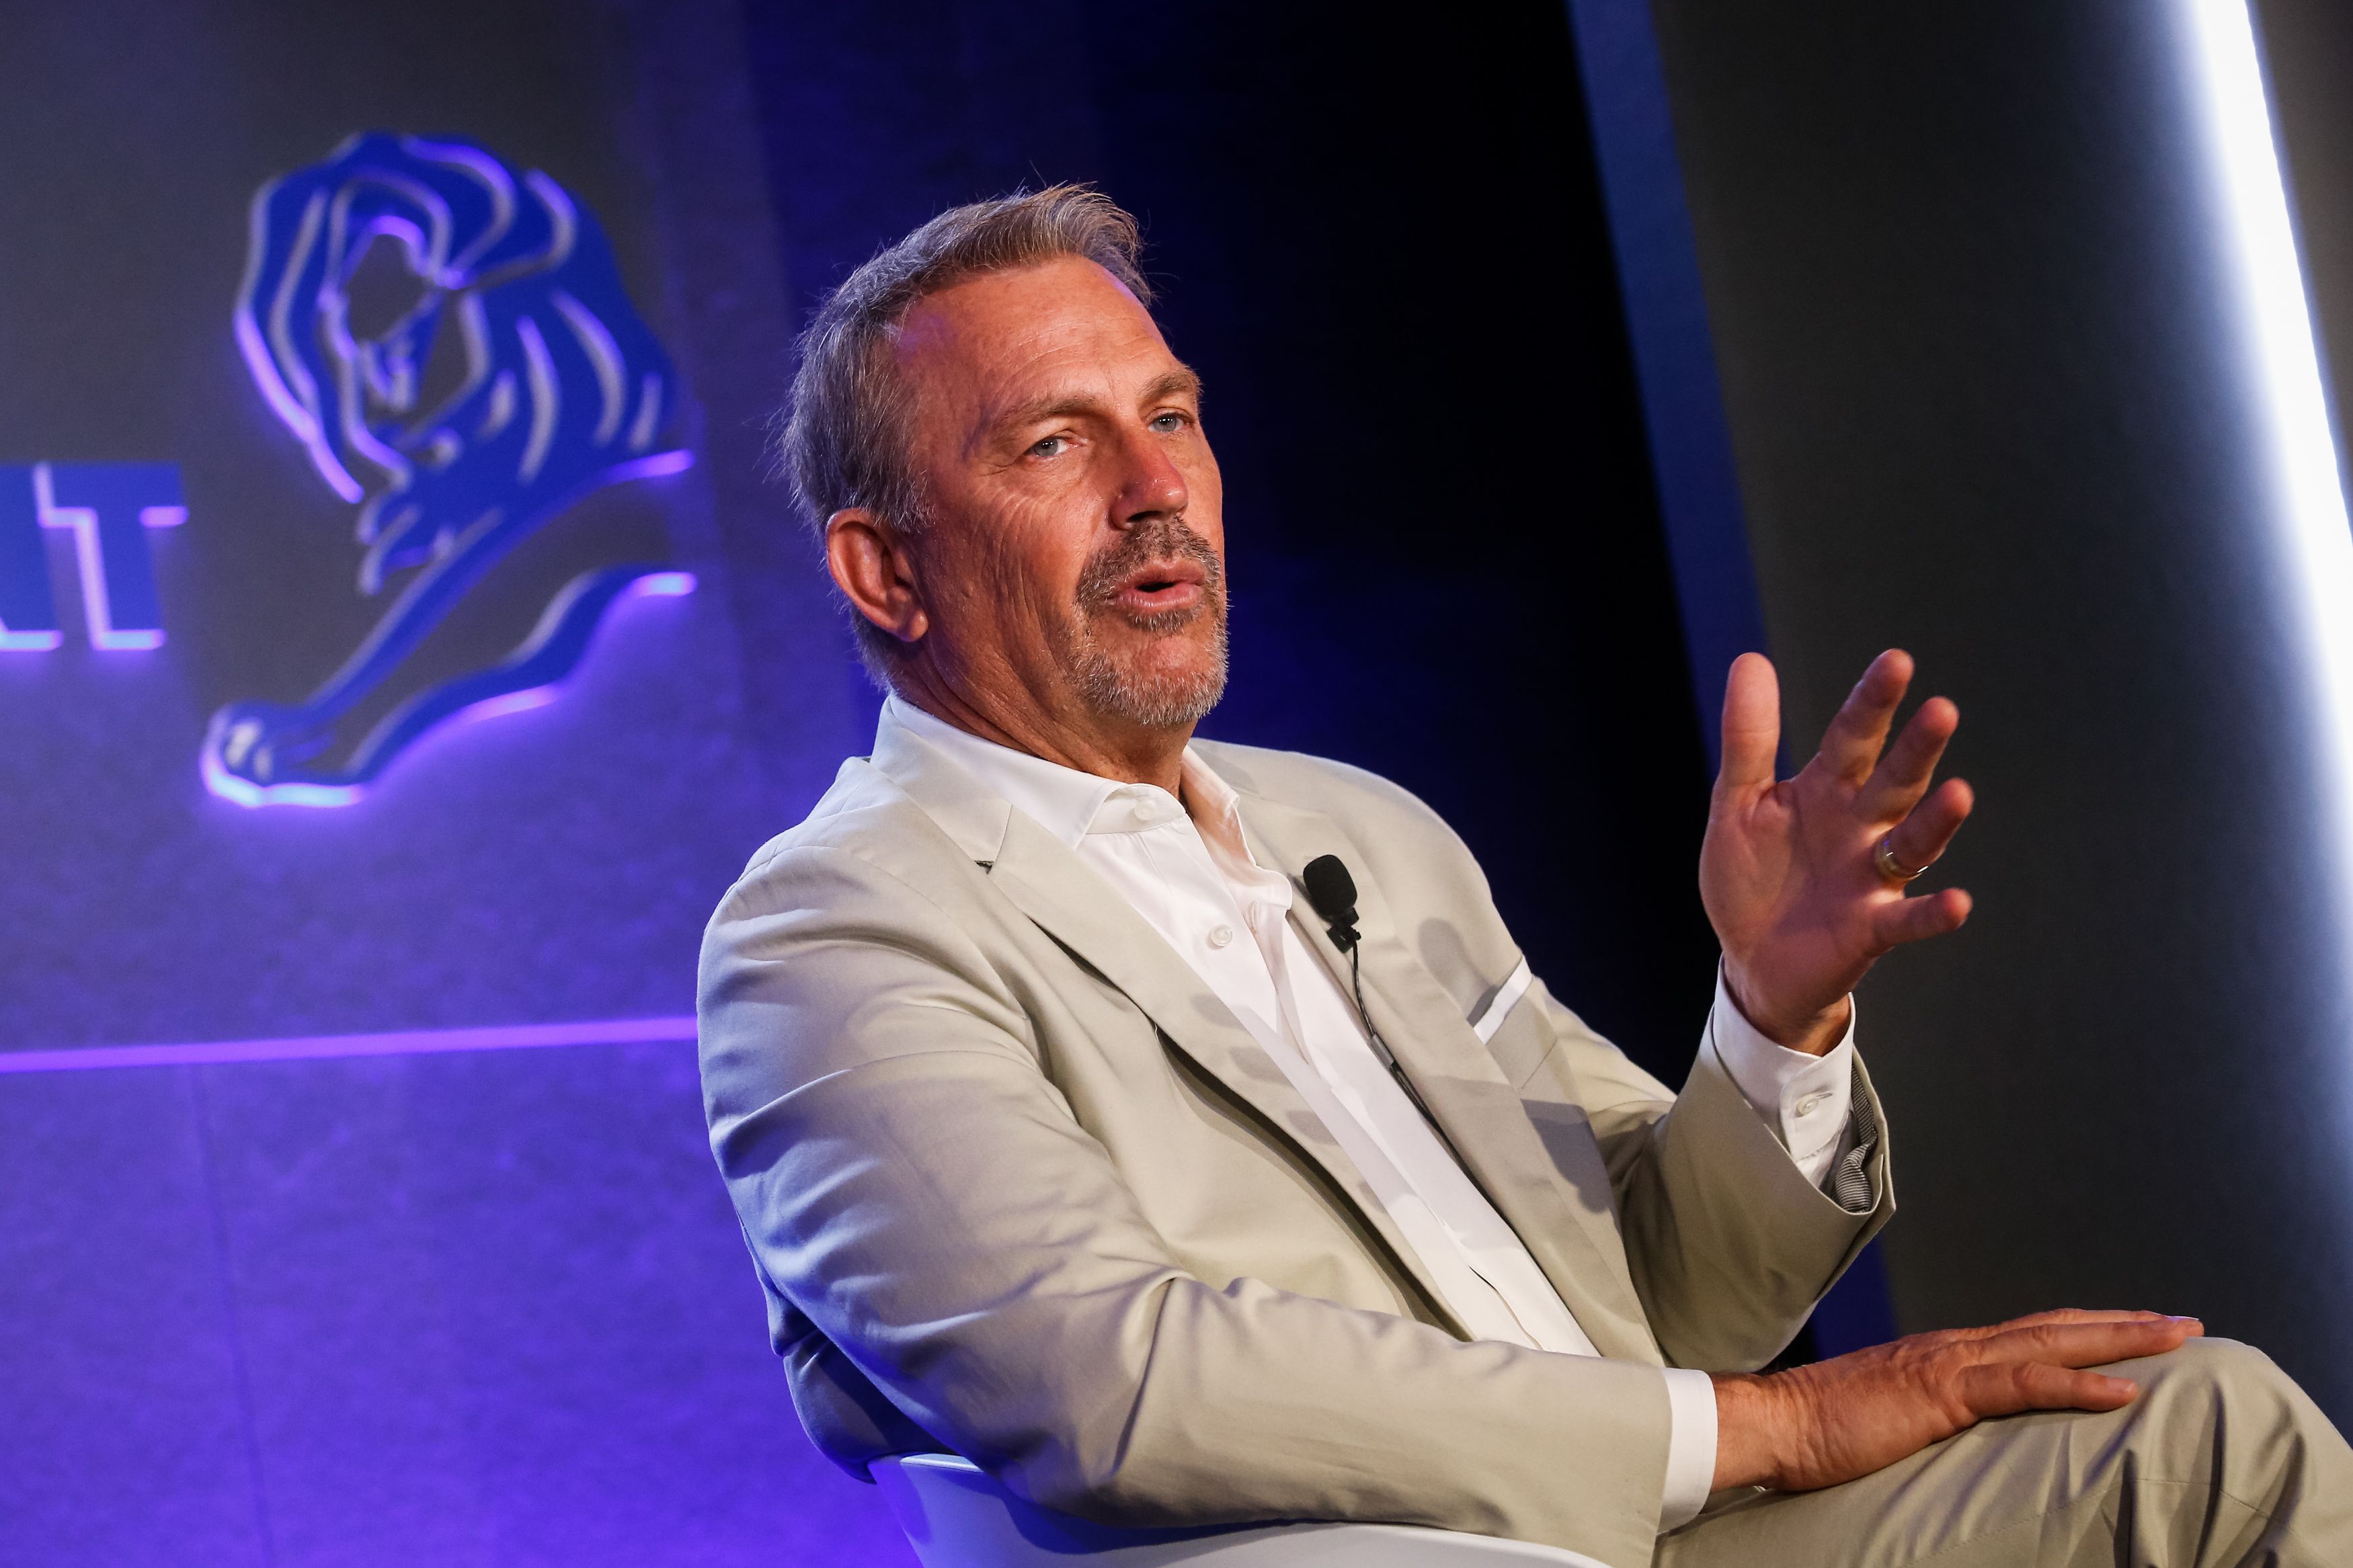 Kevin Costner during the Cannes Lions Festival 2018 on June 21, 2018 | Photo: Getty Images